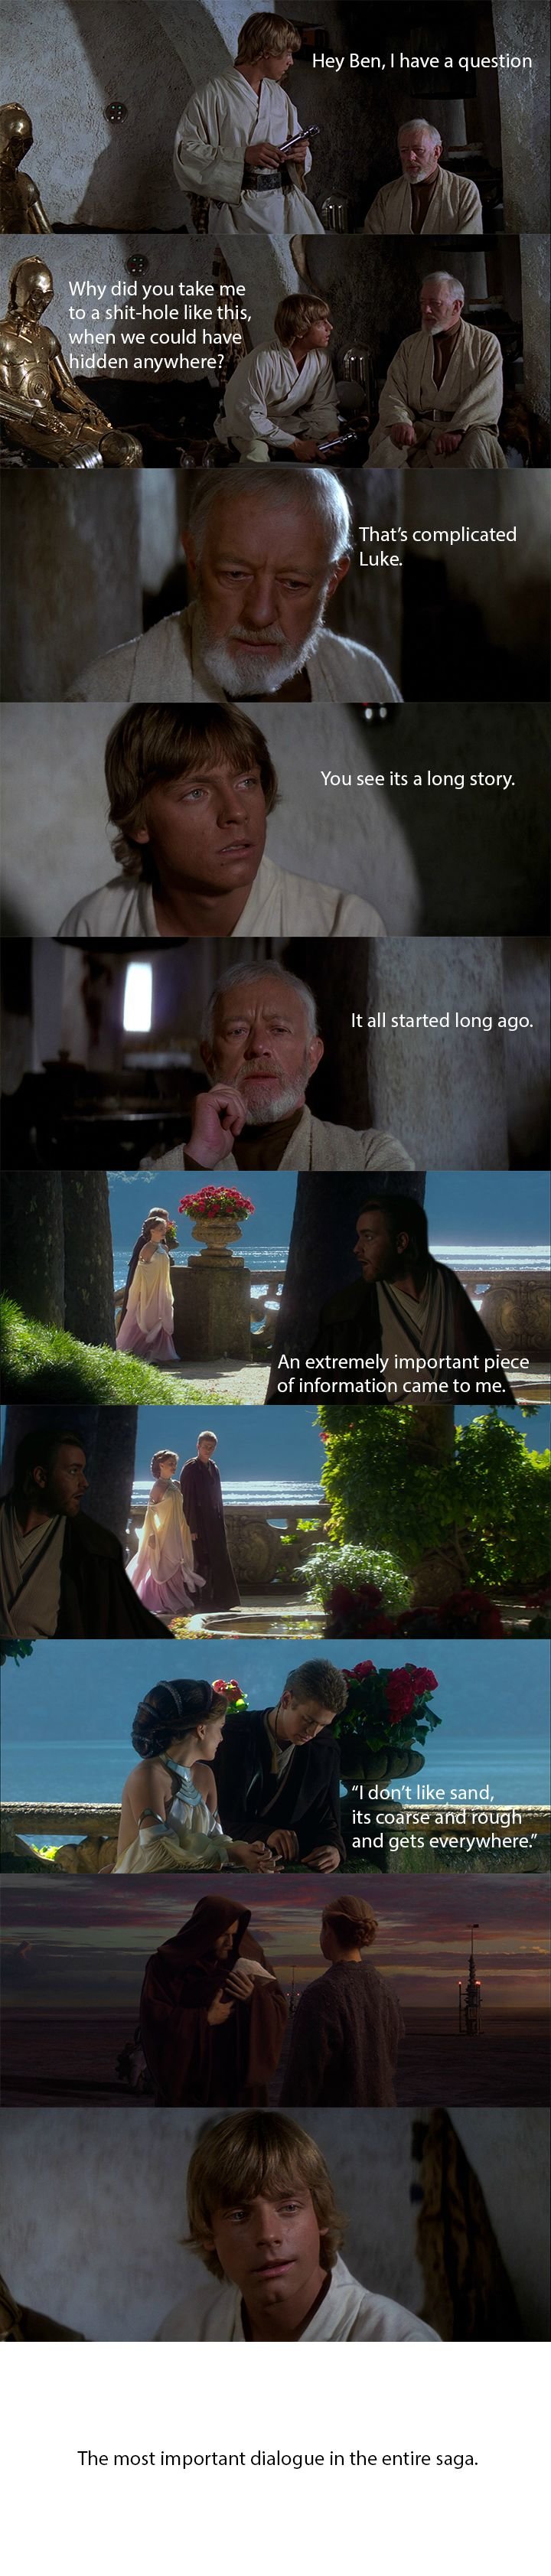 The most important dialogue in Star Wars. Good guy Obi-Wan -thedistrict. Hey Ben, I have a question t, Why did you take me to a shitehole like this, sis, . when